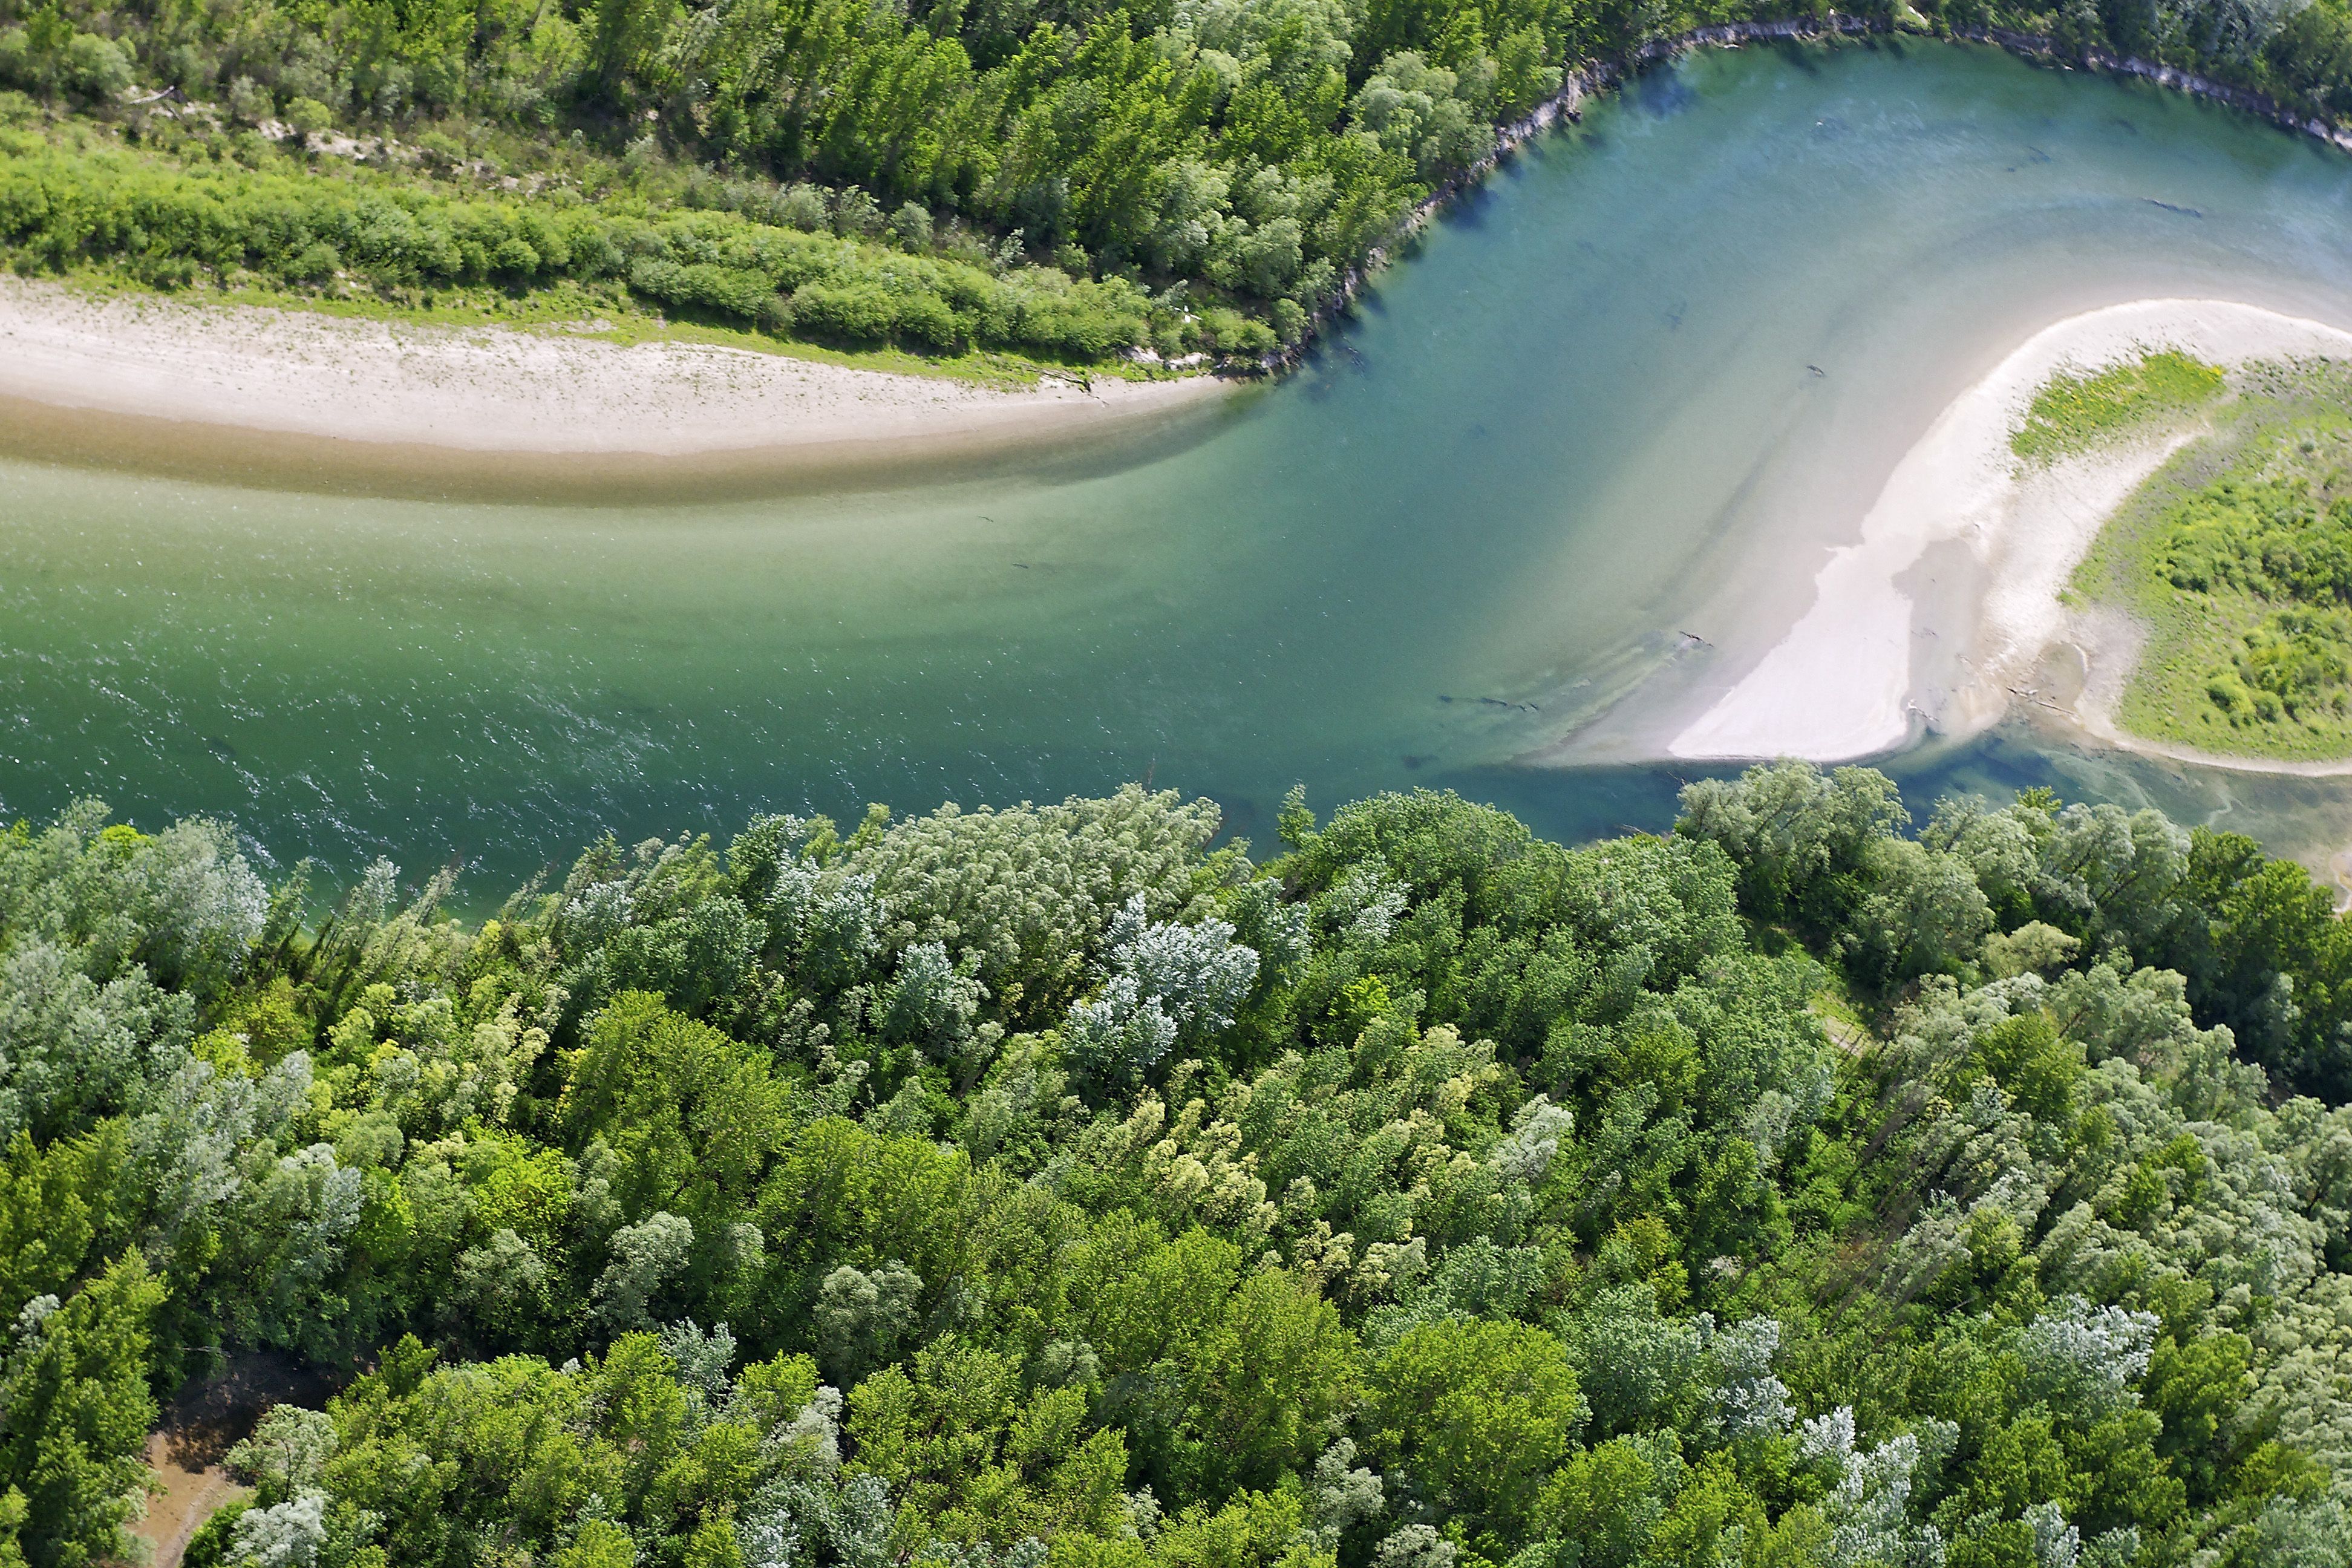 On September 15, 2021, the Drava River, together with the Mura and Danube, was proclaimed the world first biosphere reserve across five countries by UNESCO. The total area of the reserve is 930,000 hectares. It stretches 700 km along the Mura, the Drava and the Danube, covering Austria, Slovenia, Croatia, Hungary and Serbia. This makes it the largest river protected area on the continent. Inclusion in the UNESCO World Network of Biosphere Reserves is an important contribution to the EU strategy of conserving biodiversity in the region and restoring 25,000 km of rivers by 2030